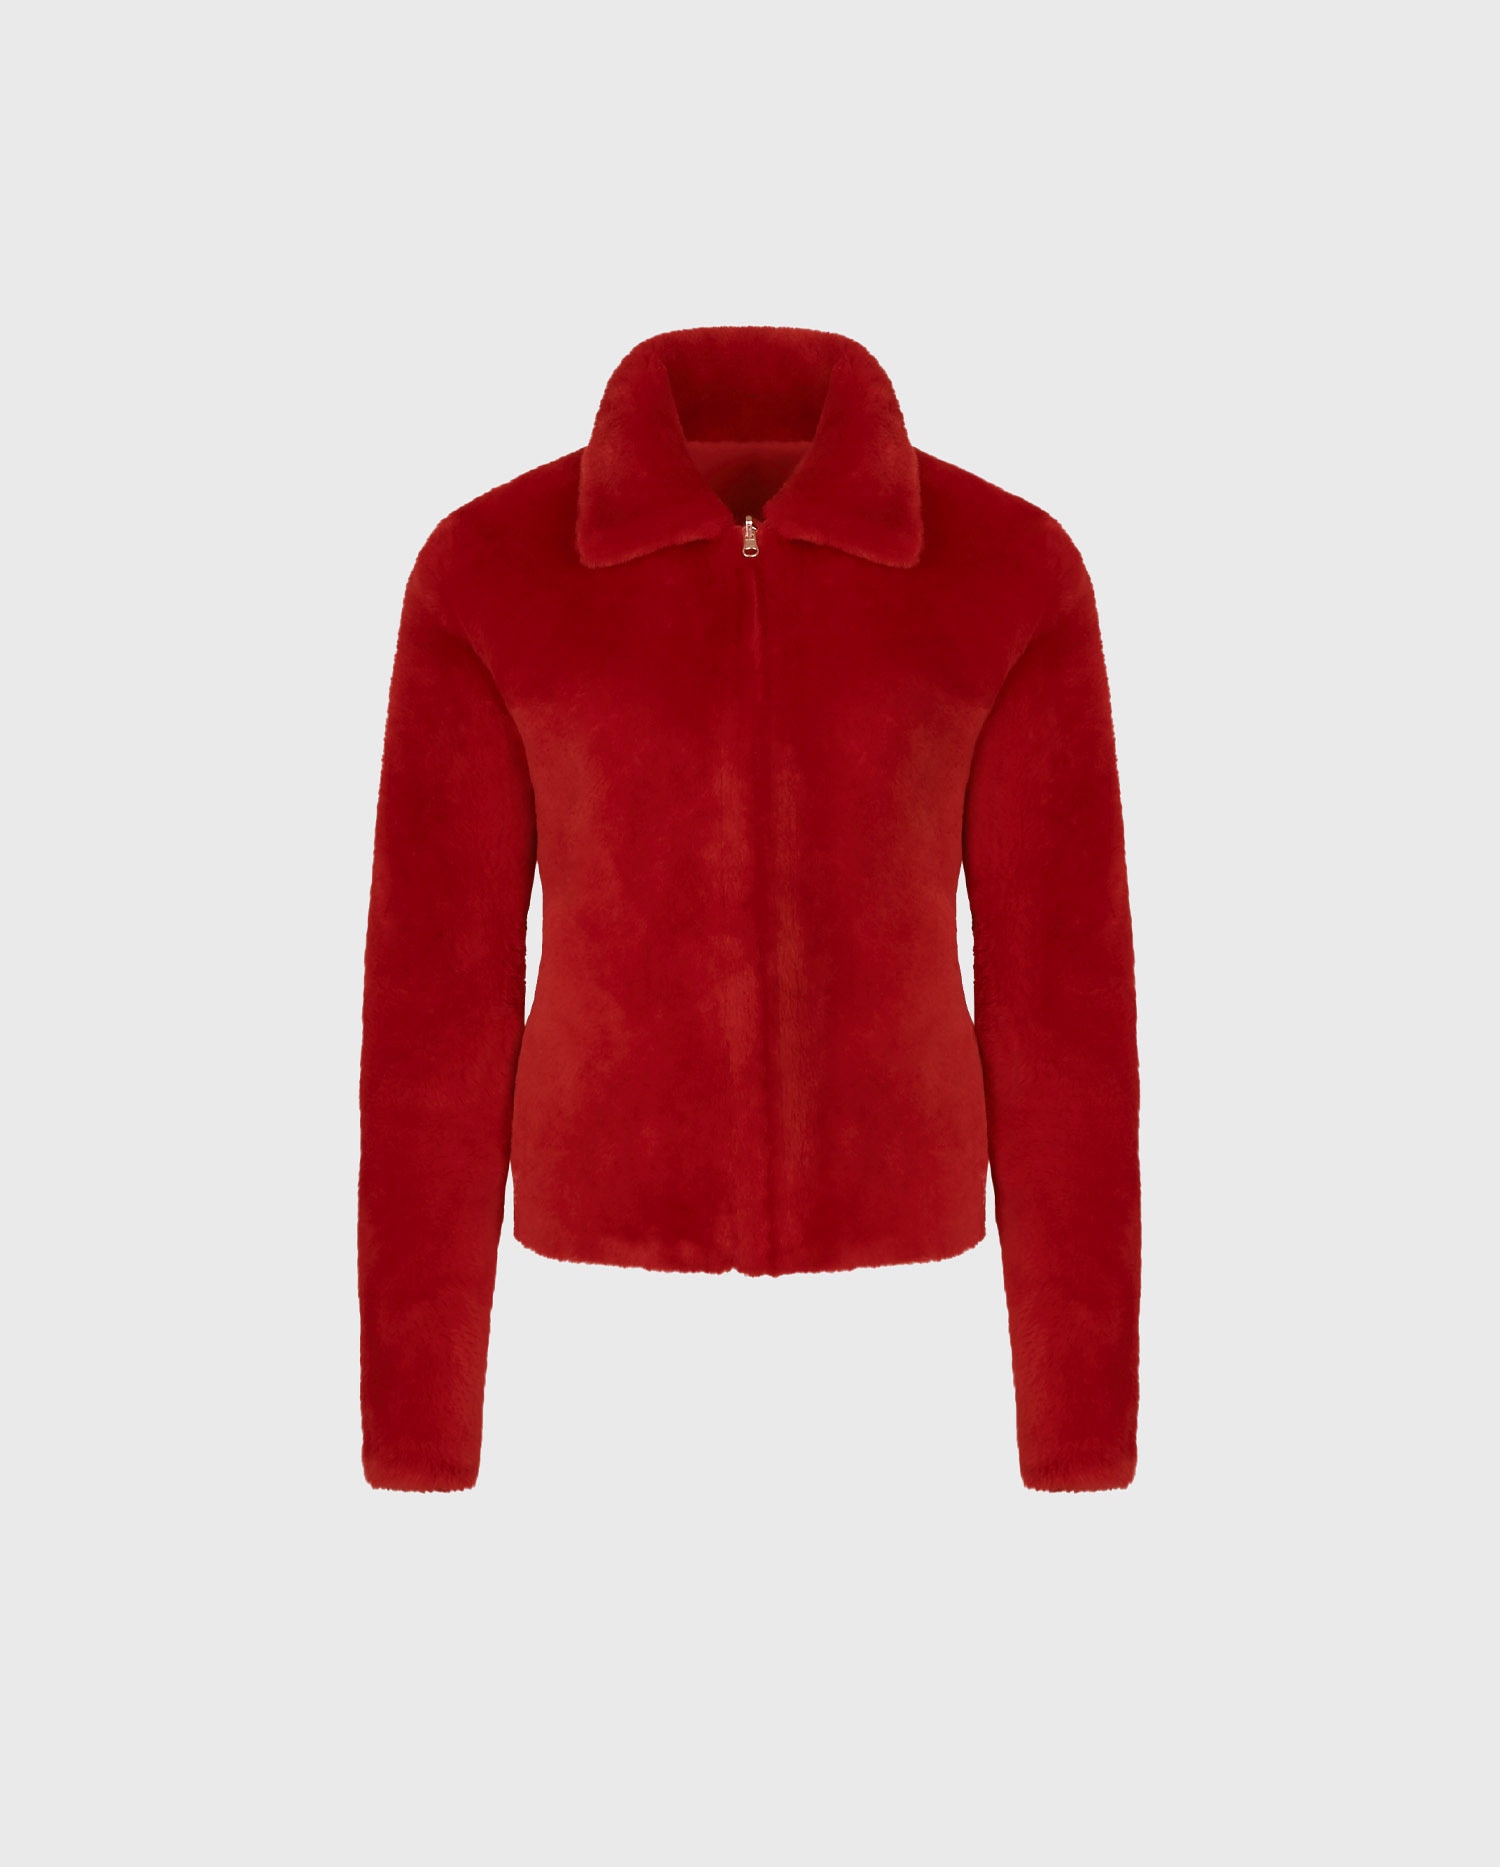 Discover The WHARTON Reversible red shearling and leather jacket with classic collar from ANNE FONTAINE